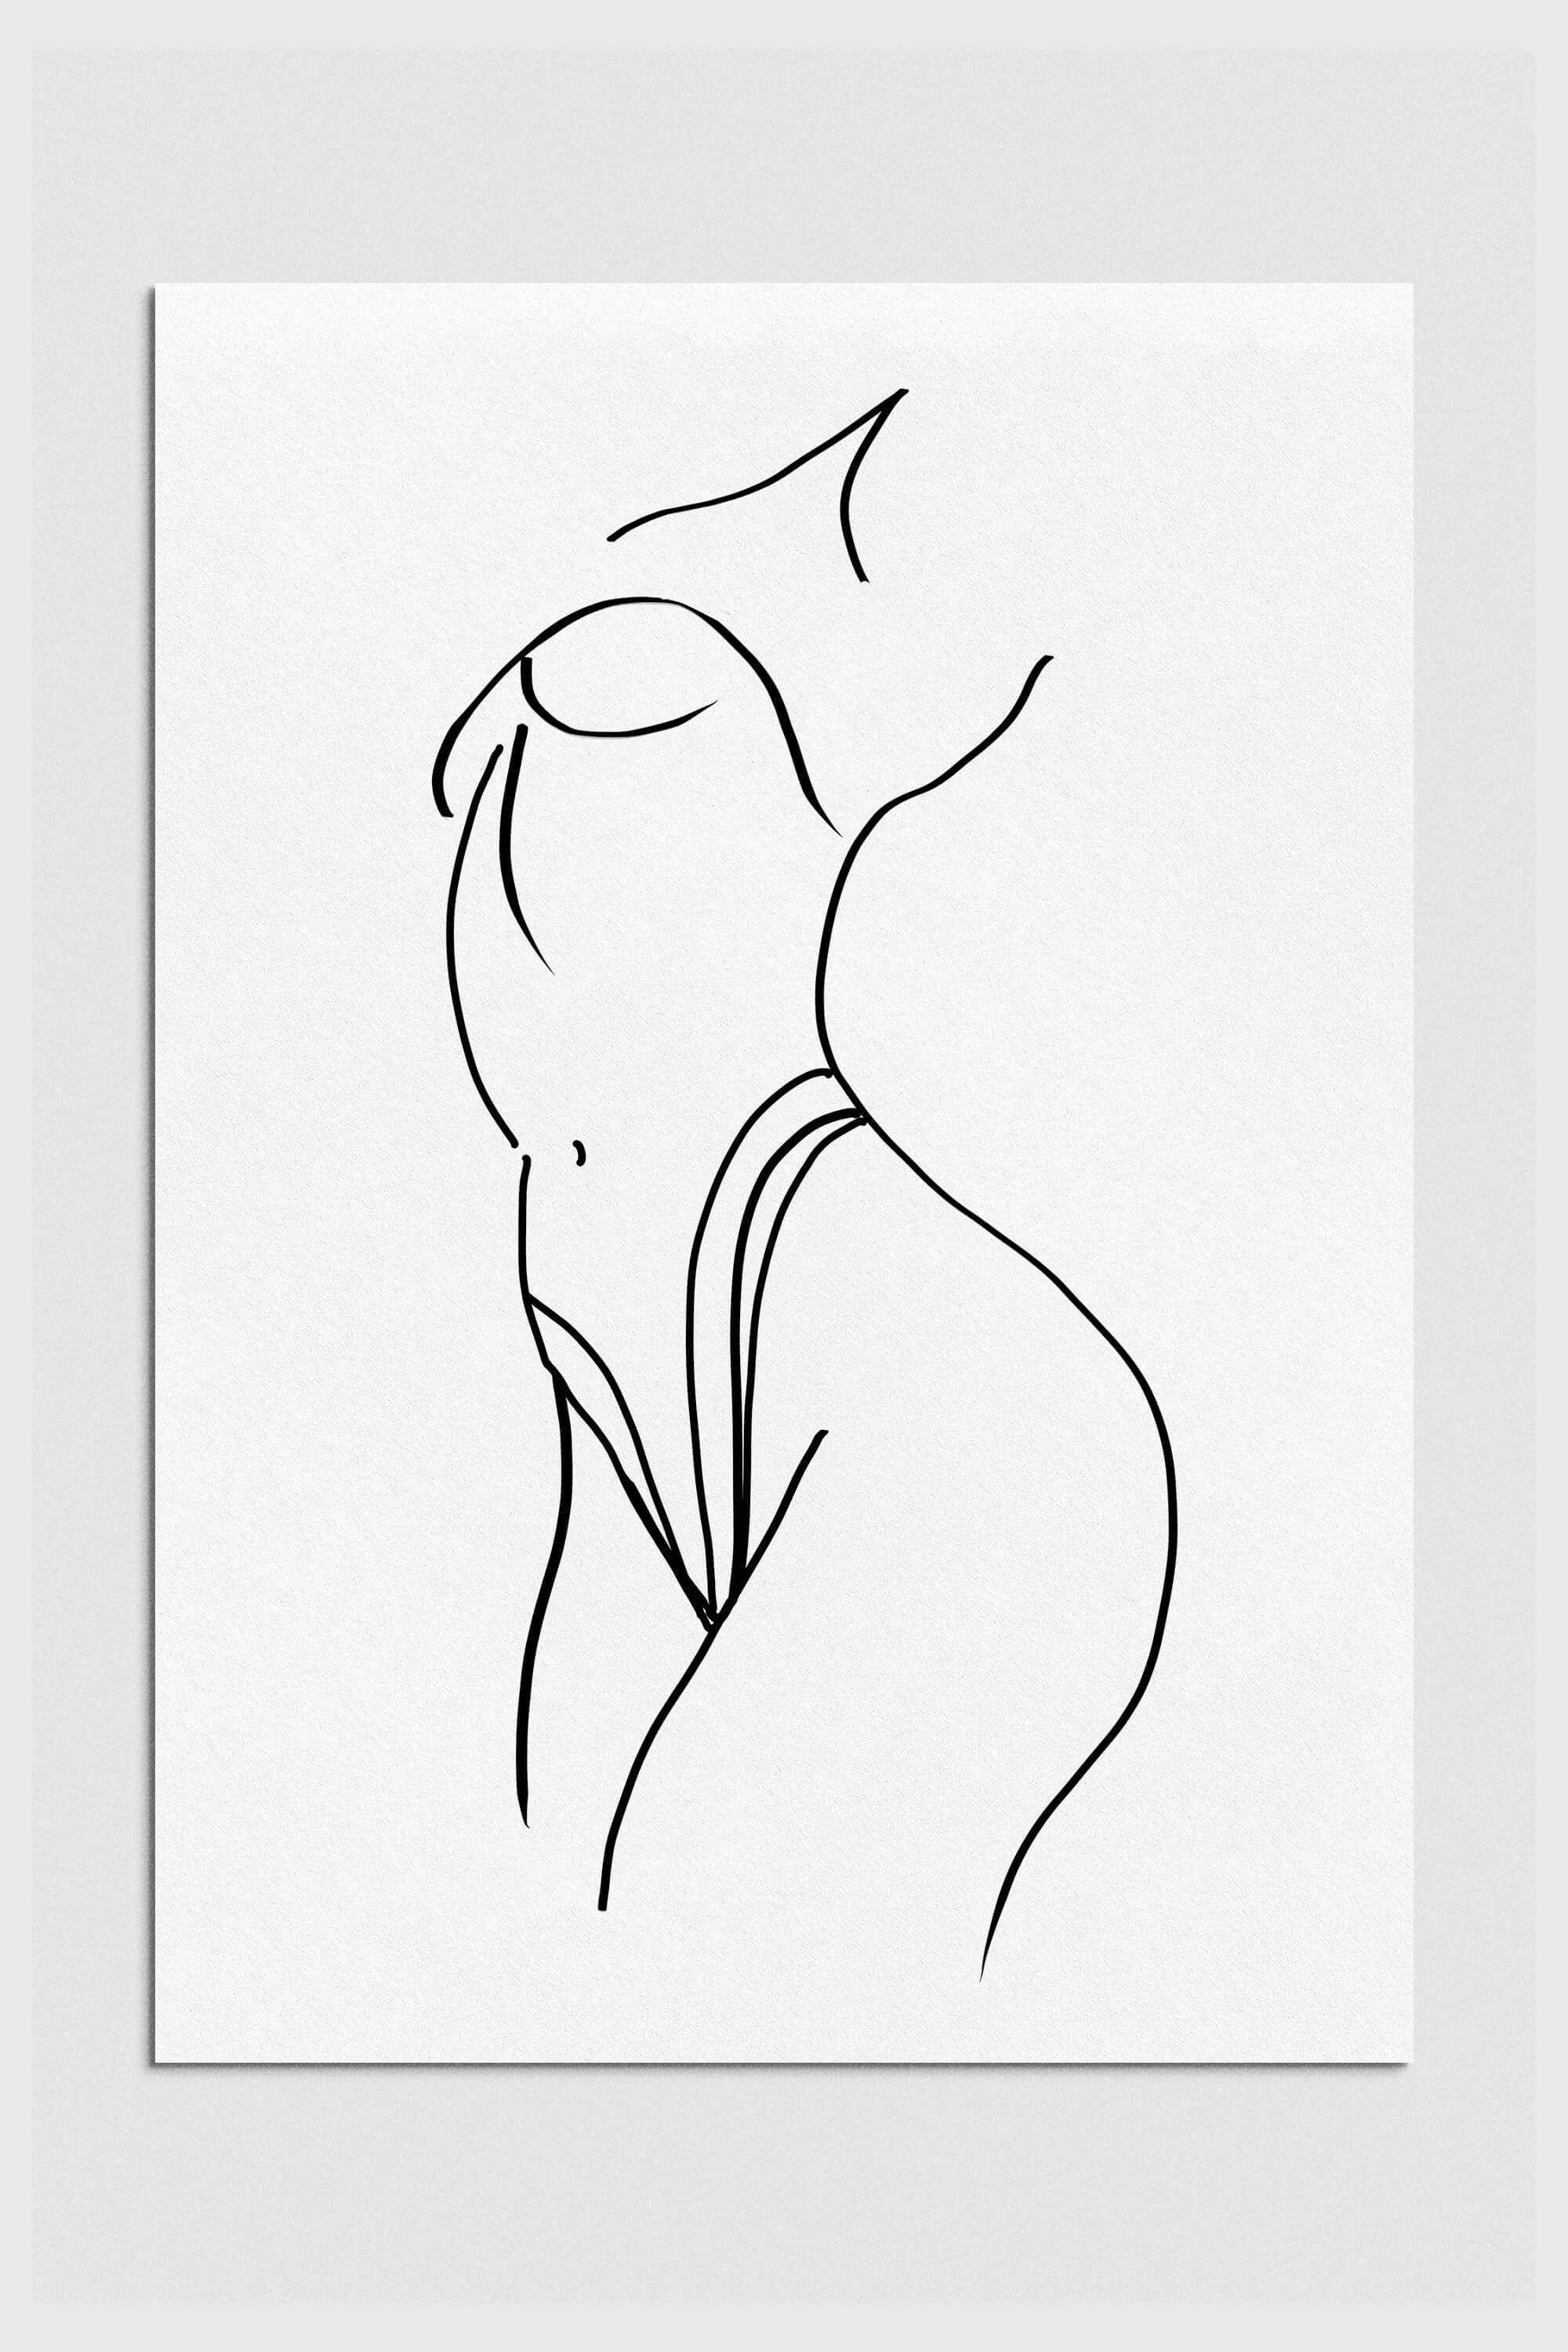 Black and white minimalist line drawing of a woman's silhouette, celebrating femininity and strength. The clean lines and simplicity add a touch of modern sophistication. Perfect for lovers of elegant and contemporary wall art.